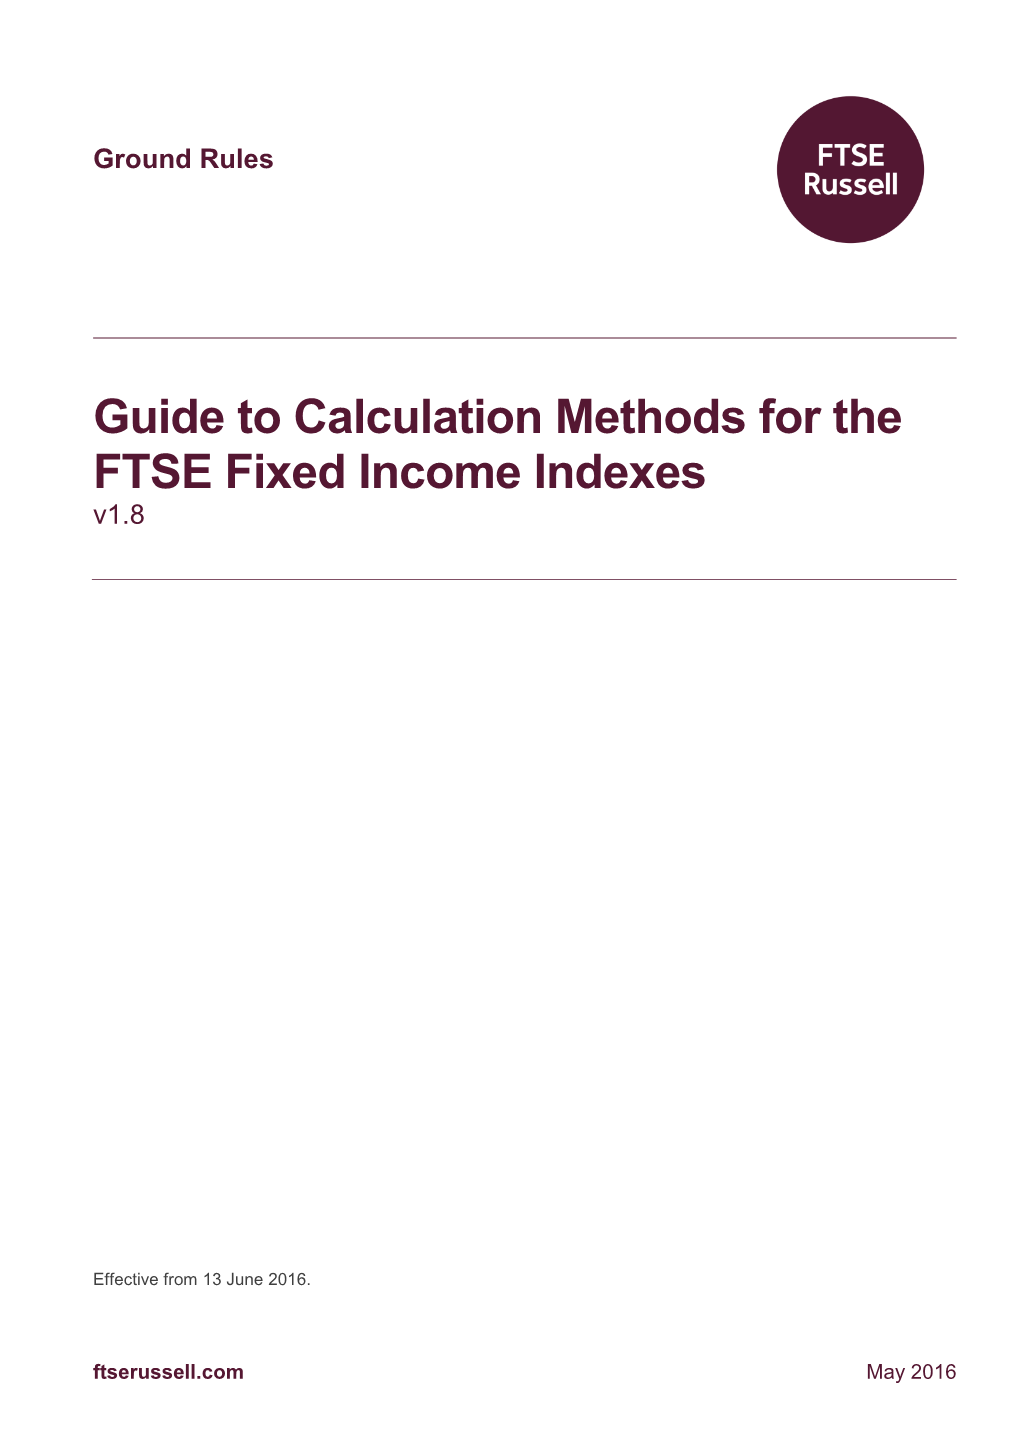 Guide to Calculation Methods for the FTSE Fixed Income Indexes V1.8